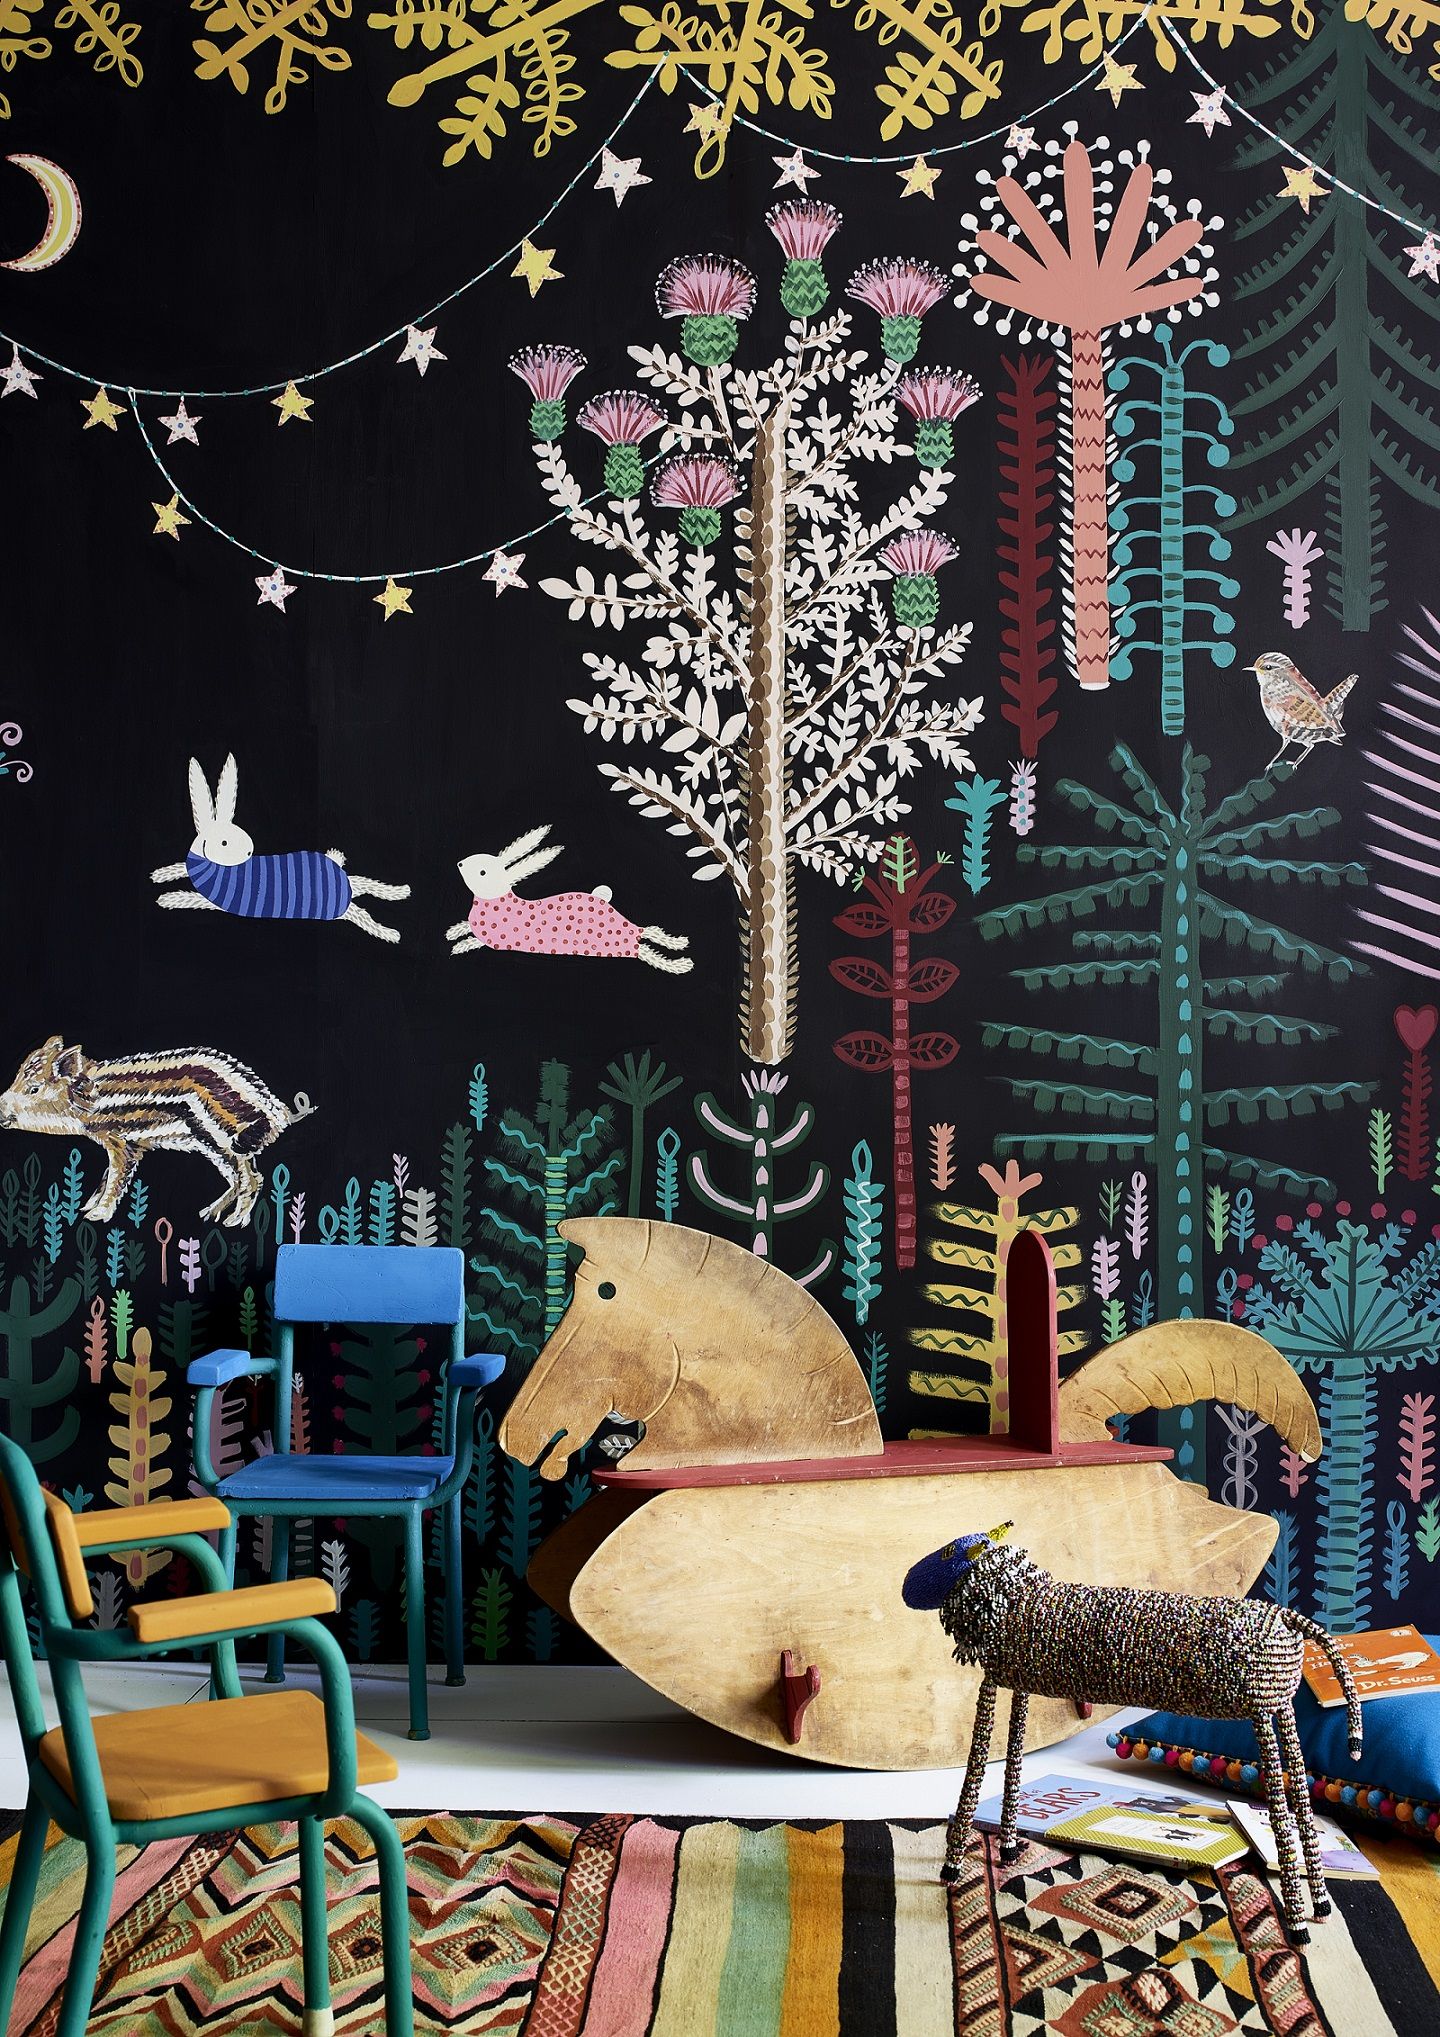 <p>                     Using stencils or painting freehand on a neutral background can give a playroom a one-of-a-kind look – so if you're looking for wall murals with a twist, why not give it a go?                   </p>                                      <p>                     ‘The easiest and most cost-effective transformer, updating nursery furniture is a simple weekend activity that even the smallest hands can help with,’ says Annie Sloan, color and paint expert.                   </p>                                      <p>                     ‘Use up leftover tins of Chalk Paint™  from larger projects and don’t be fussy about the palette. Let the kids go wild with their choices, it’s their space after all! For those with a more artistic leaning, create your kids their very own mural, filled with favorite patterns and motifs – a wall full of color and imagination that will inspire bedtime stories for years to come.'                   </p>